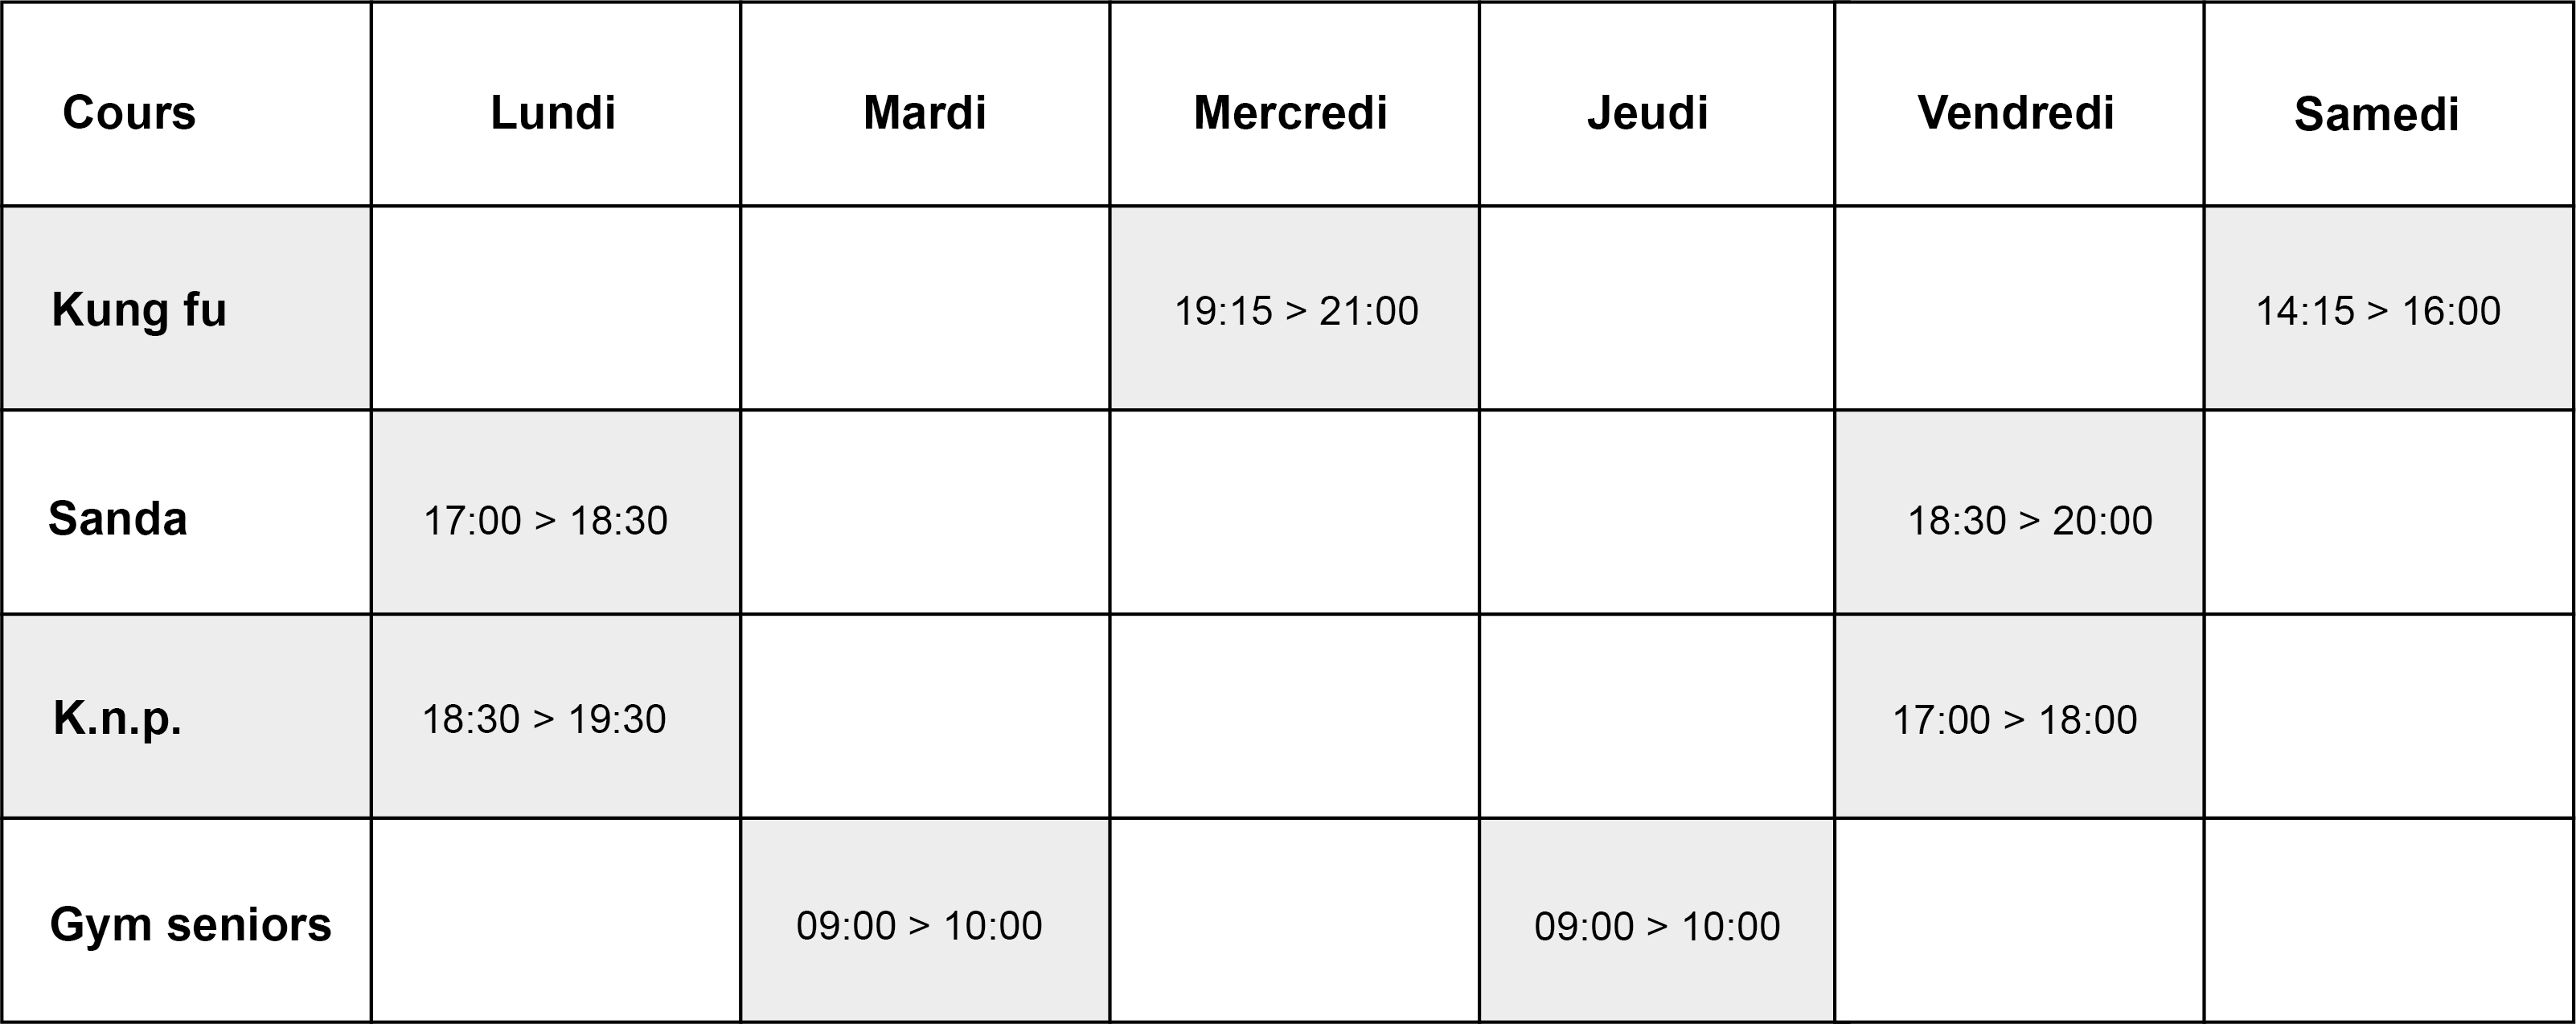 Horaires cours adultes MSG